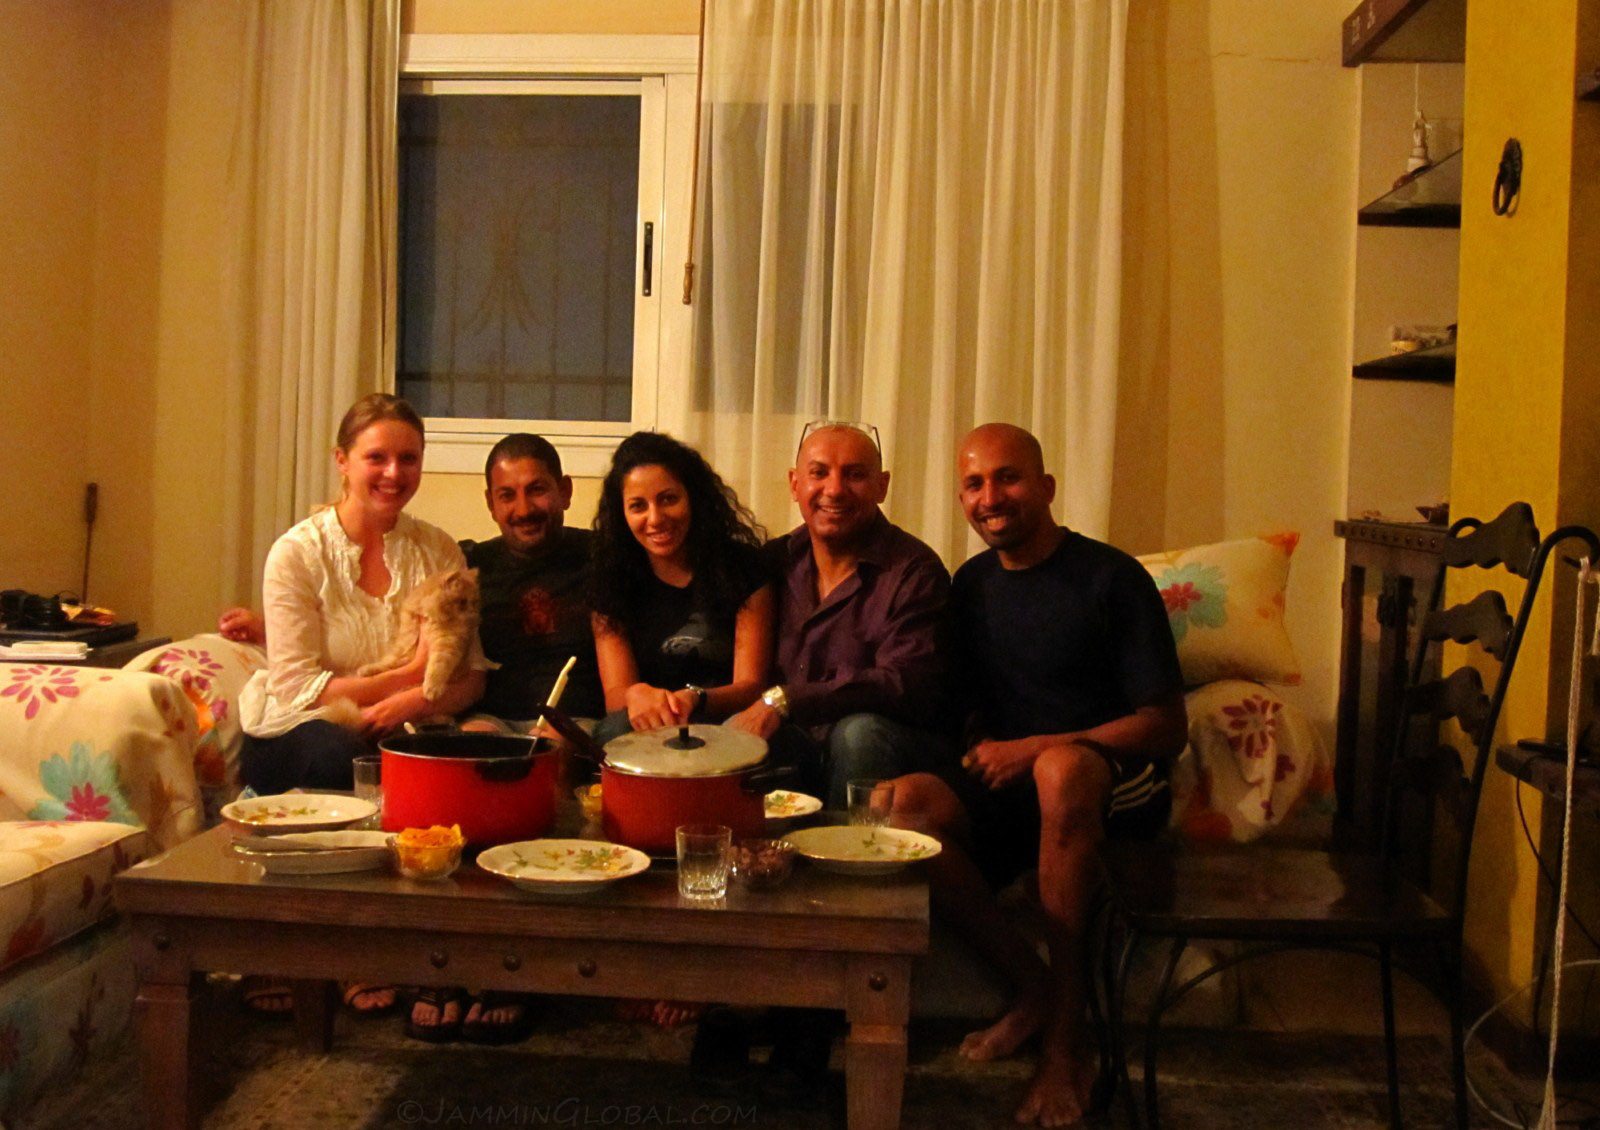 Sharing my curry with friends in Cairo, Egypt.